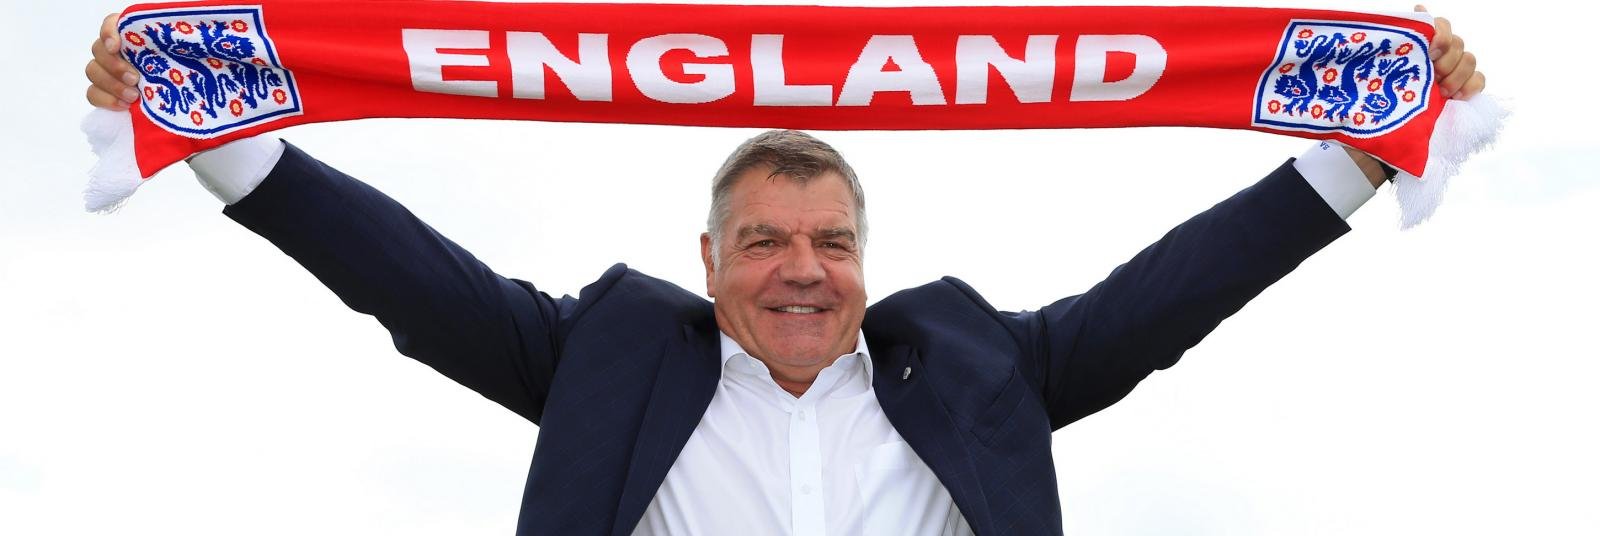 Top 5: Players who could get an England call-up under Sam Allardyce